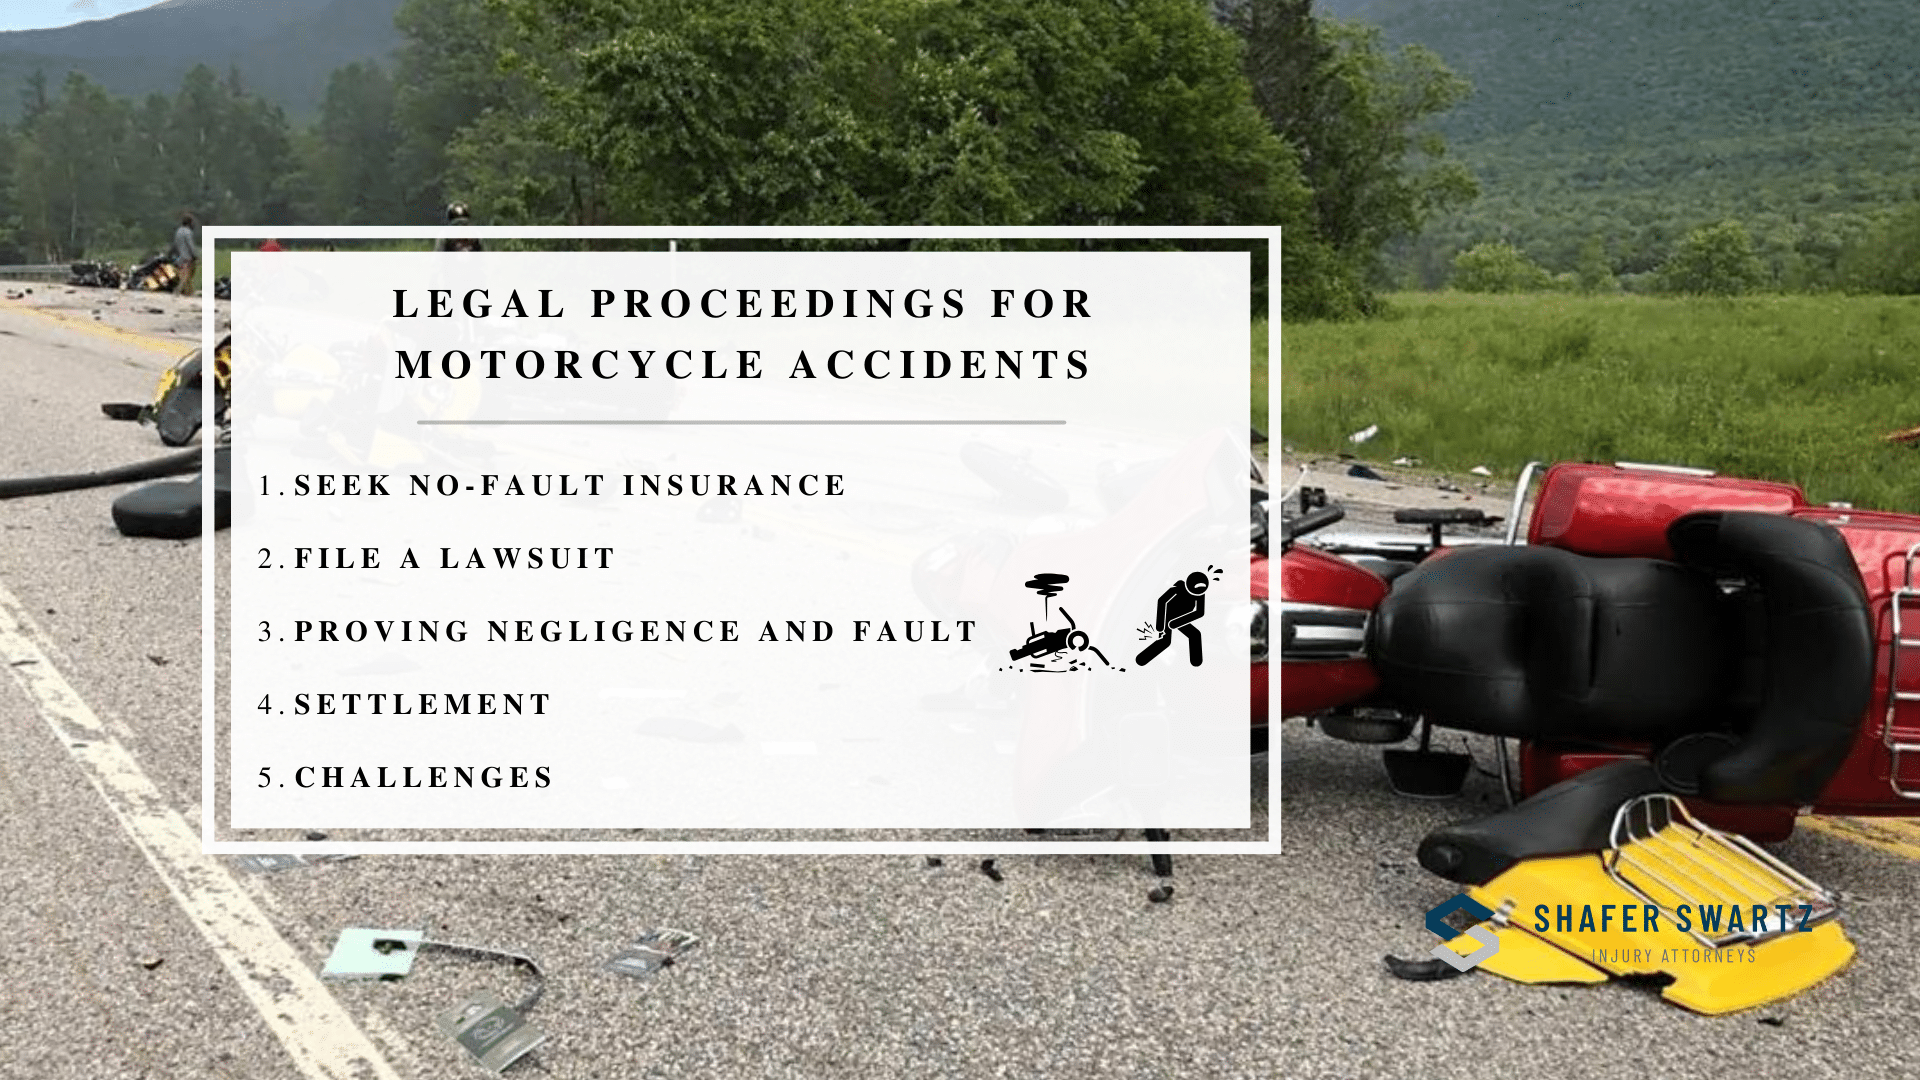 Infographic image of legal proceedings for motorcycle accidents